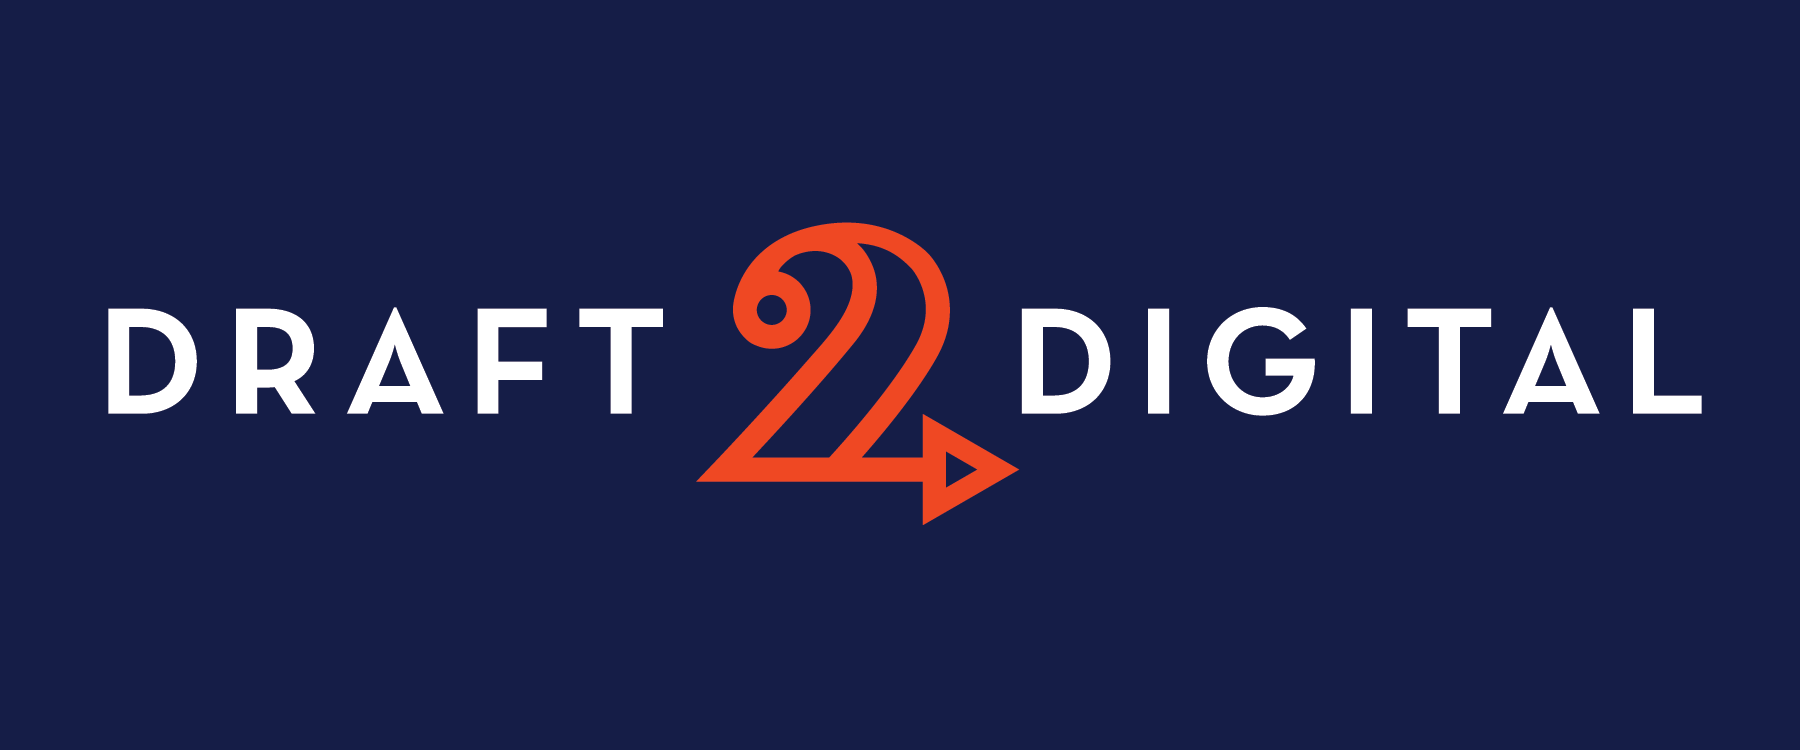 Self-Publish with Support at Draft2Digital.com